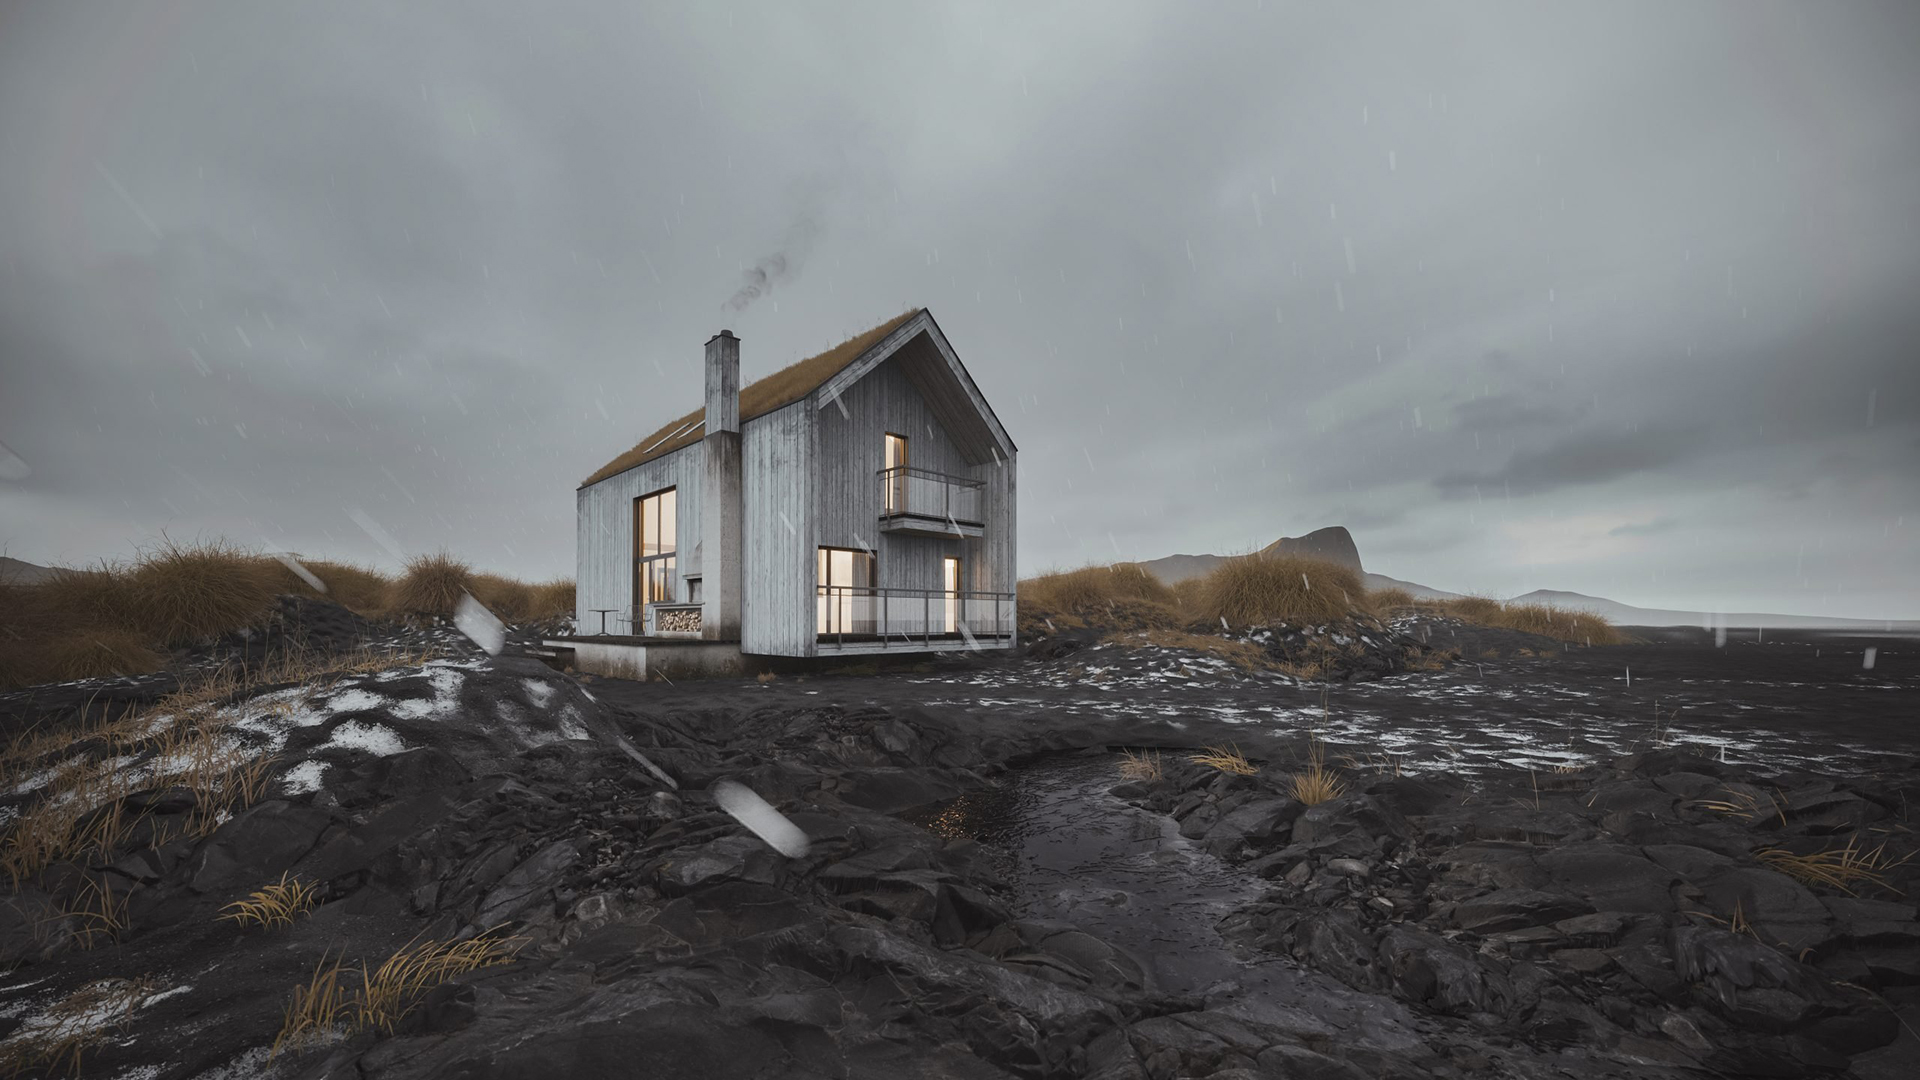 3D Exterior Visualization of a Rustic House